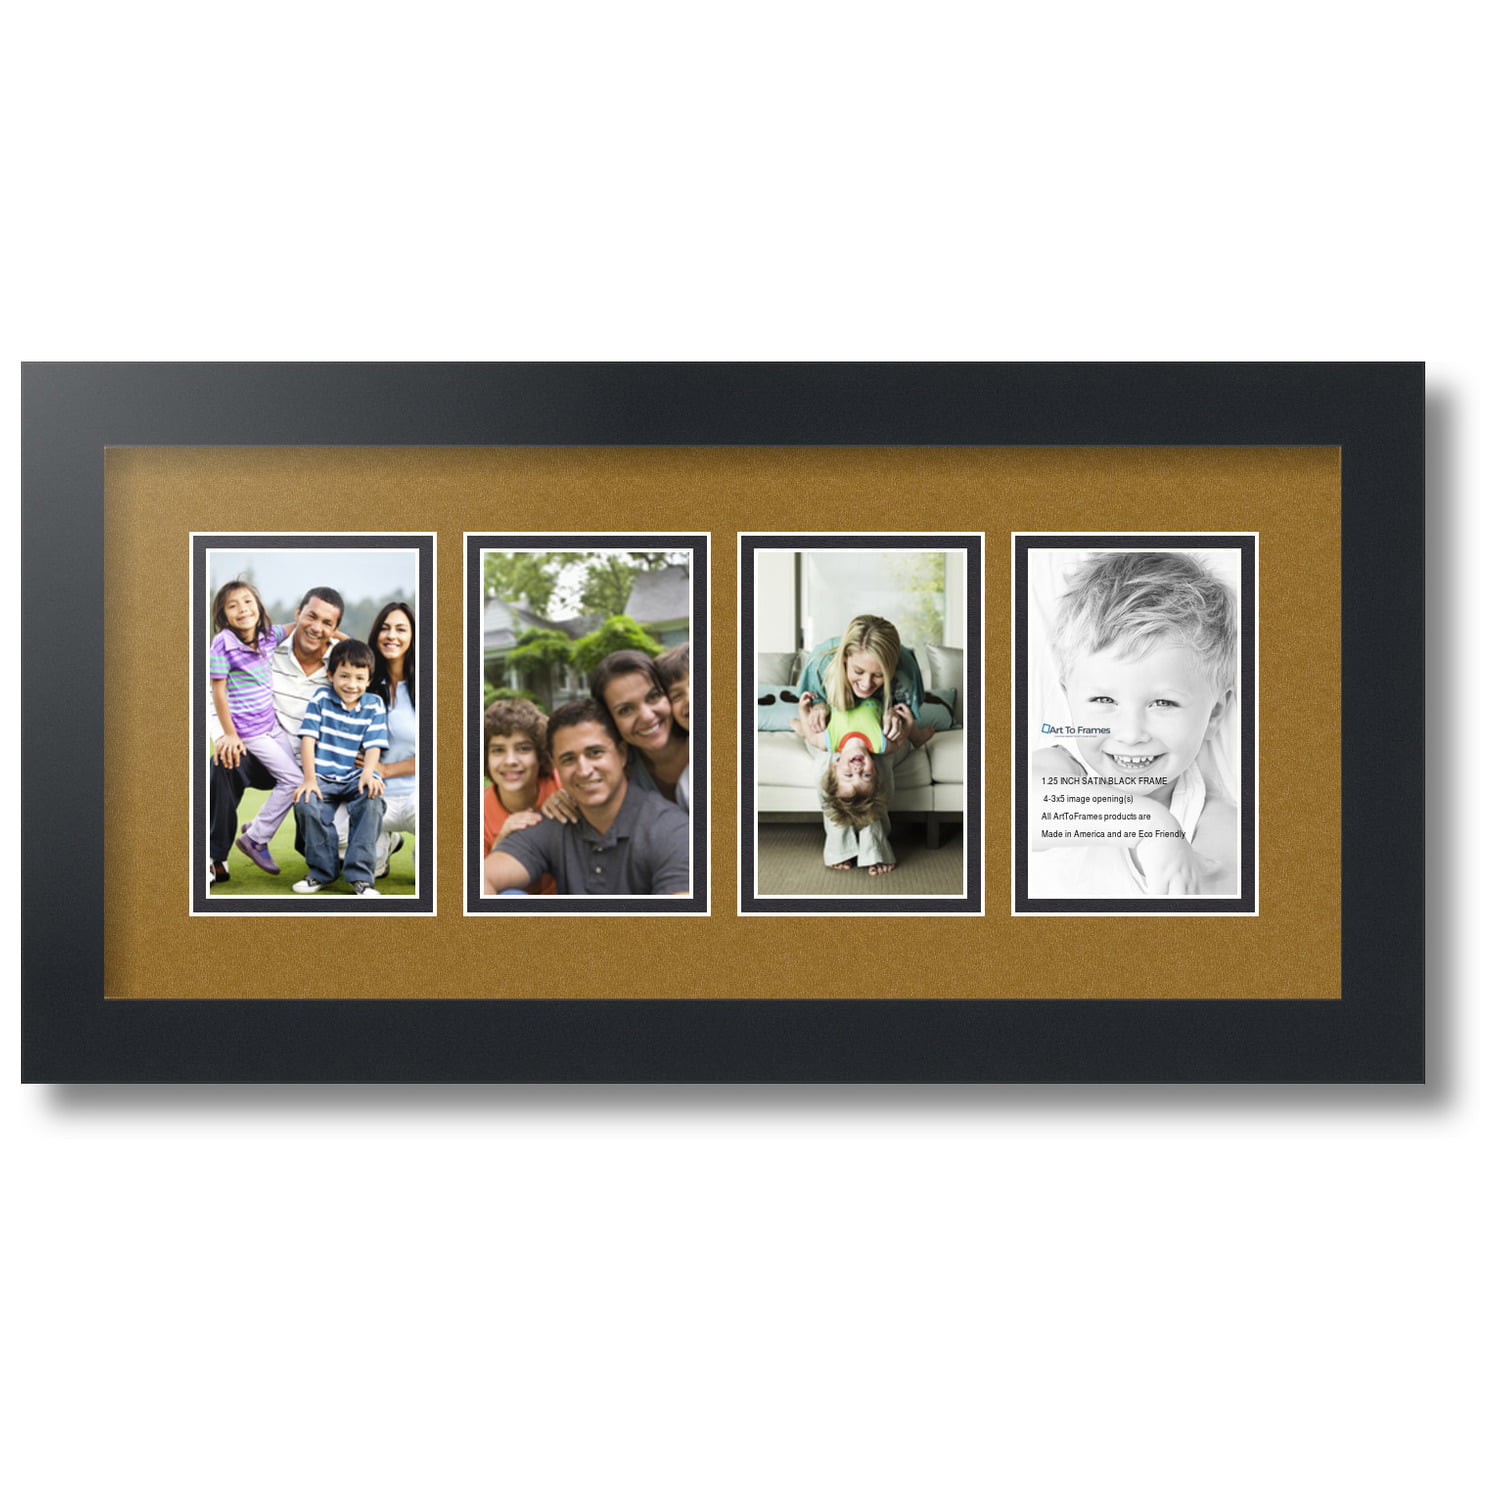 ArtToFrames Collage Photo Frame Double Mat with 4-3x5 Openings with Satin  Black Frame and Baby Blue mat.